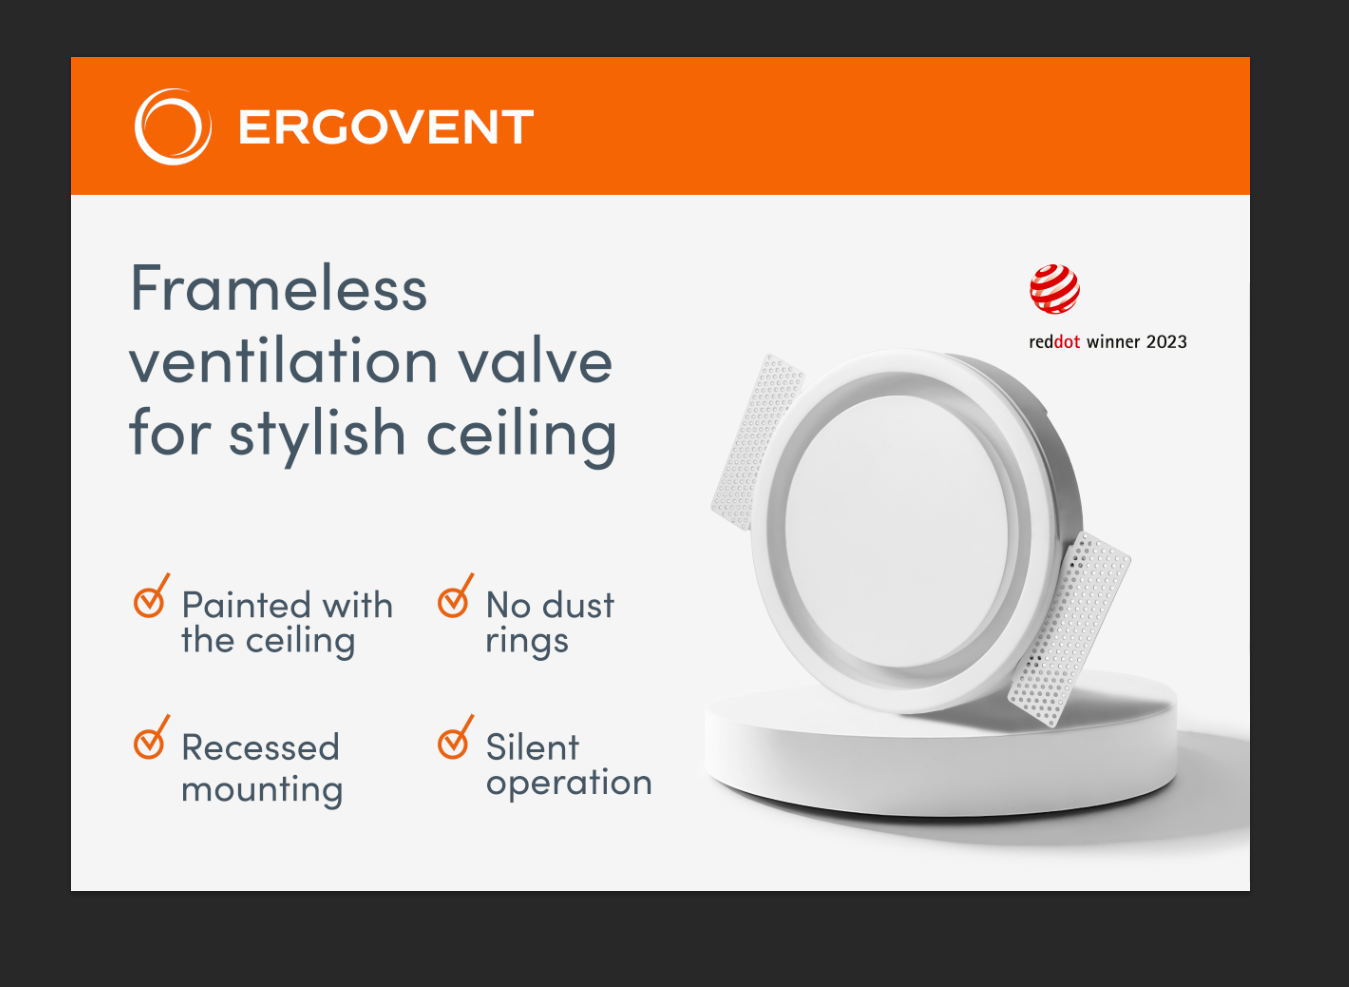 Enhancing Indoor Air with Ergovent and Luftomet Air Valves